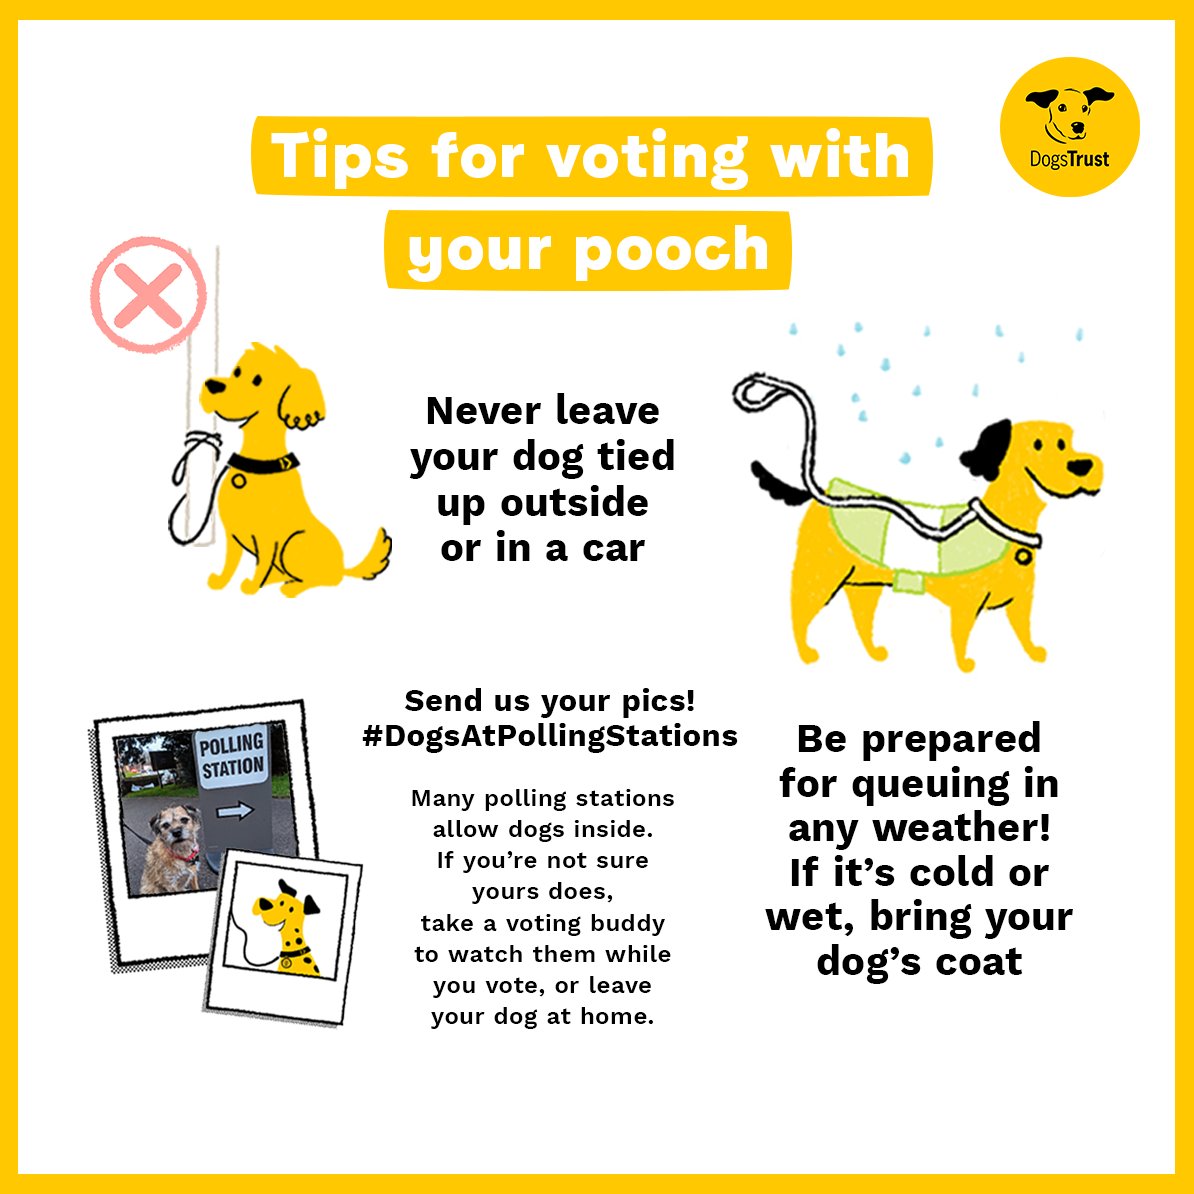 Office dog Peanut has some top tips for taking your pooch to vote today! 🐶🗳️ Share pics of your dogs at polling stations with us! #DogsAtPollingStations